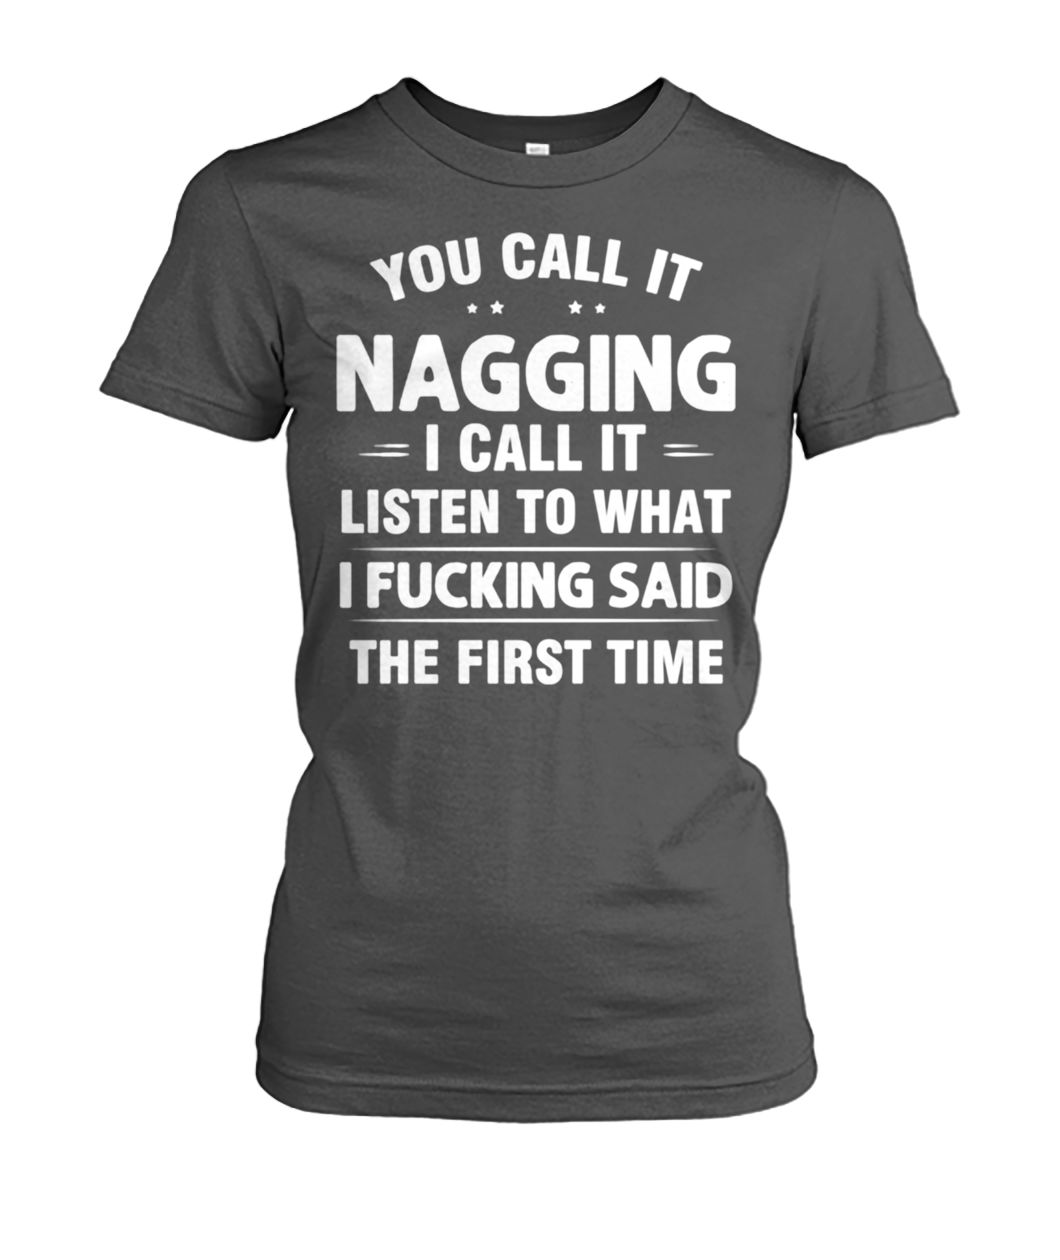 You call it nagging I call it listen to what I fucking said the first time women's crew tee